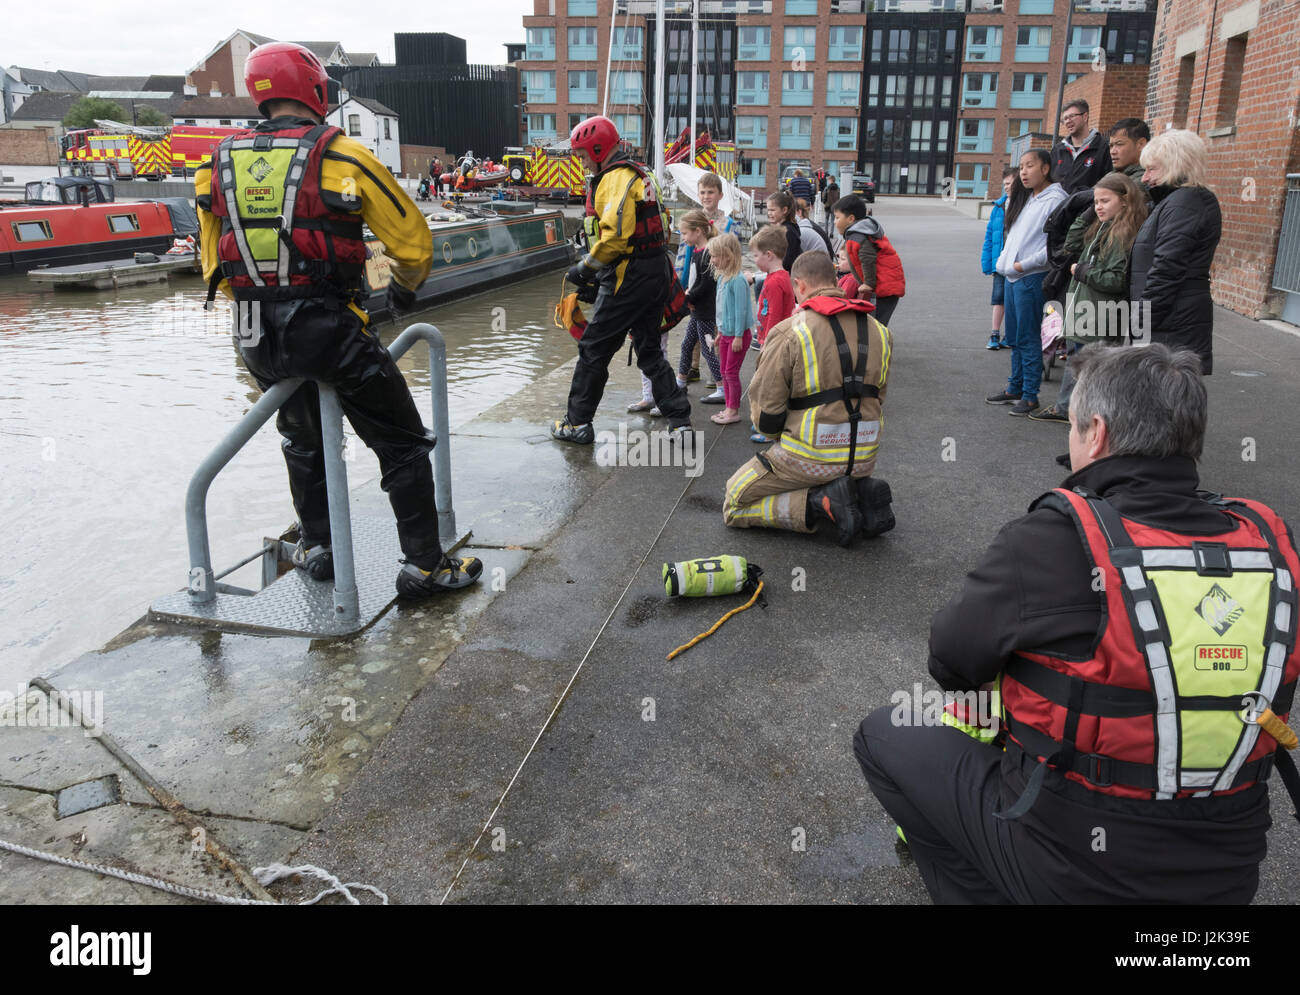 Gloucester, UK. 29th Apr, 2017. Gloucestershire Fire and Rescue services demonstrate water rescue techniques in Gloucester docks. Members of the public and docks security personnel take part. Combined with a public awareness campaign of the dangers of drinking alcohol near waterways. Credit: Chris Poole/Alamy Live News Stock Photo